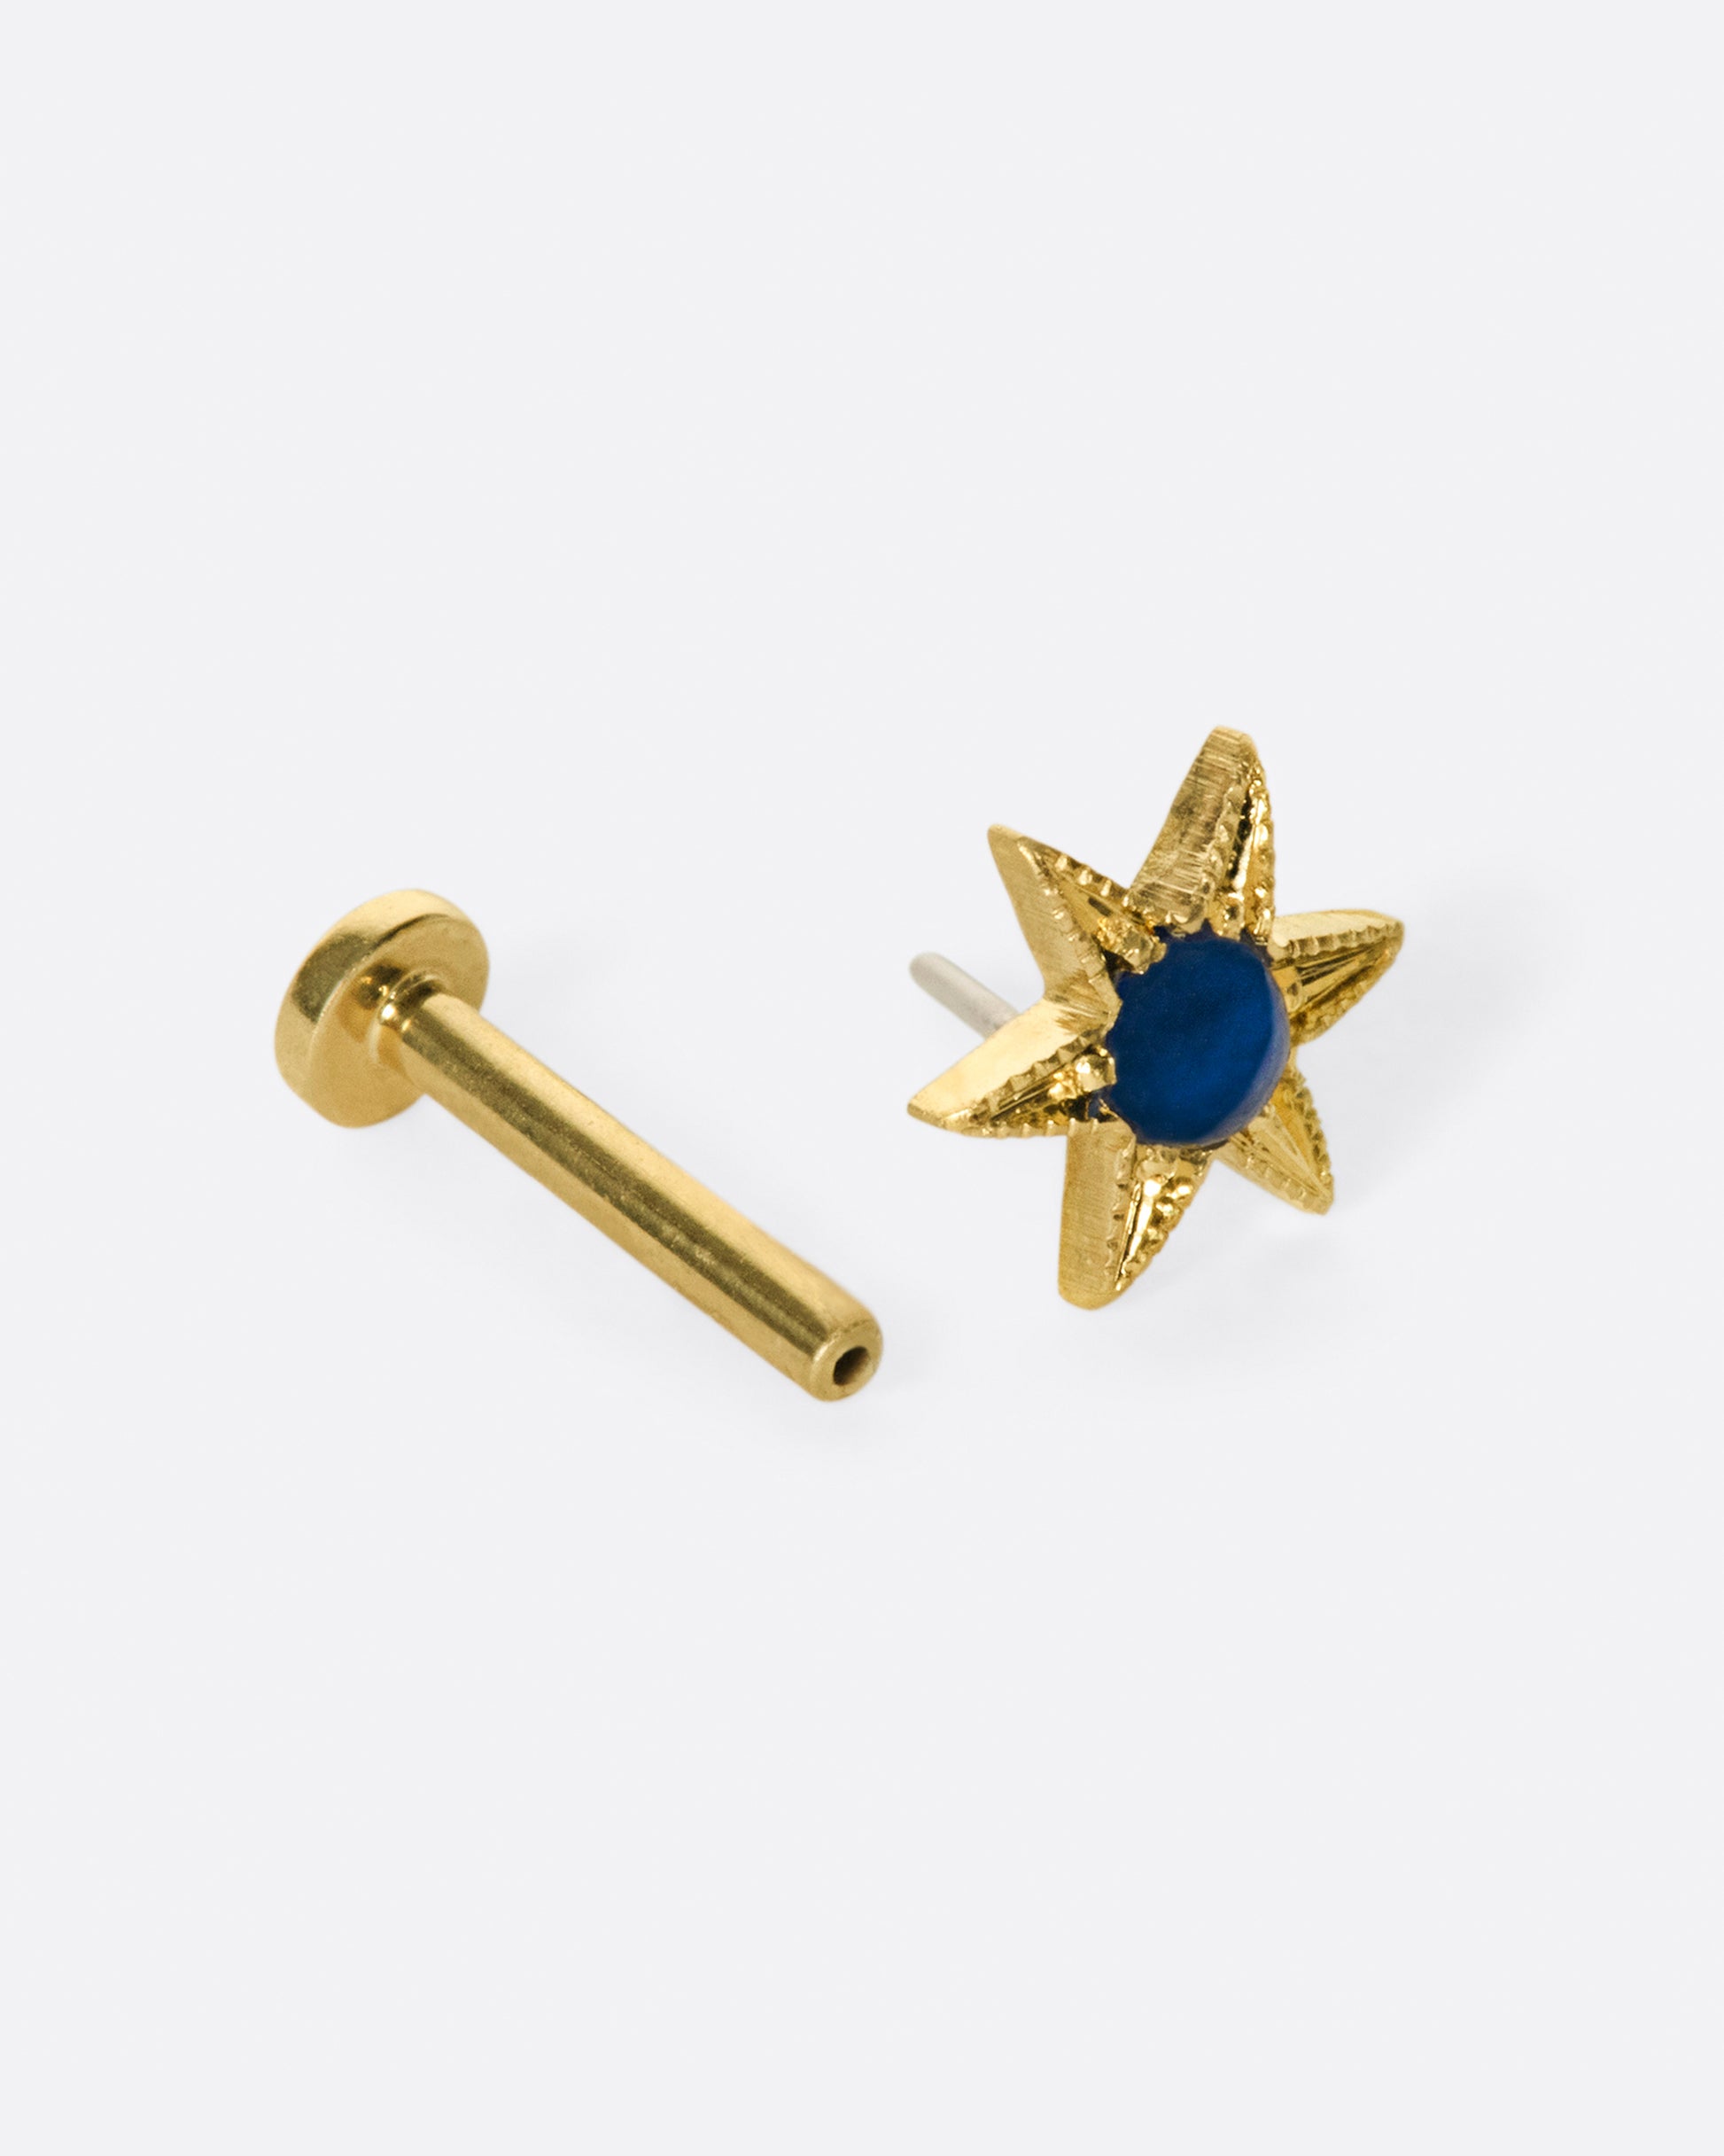 A celestial stud with a deep blue sapphire cabochon at its center.